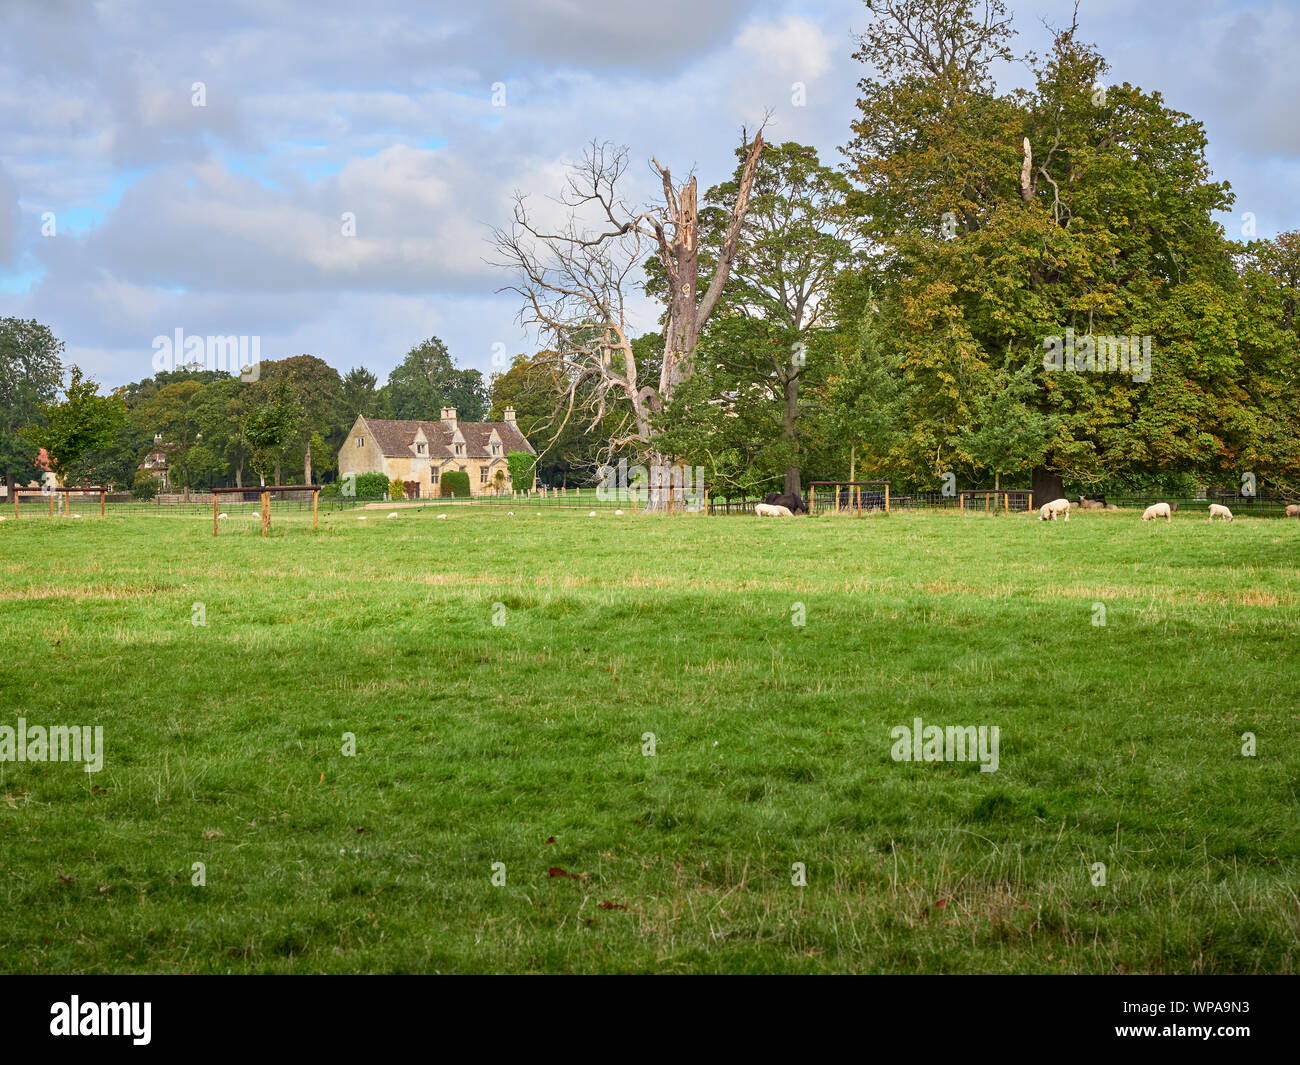 A stone cottage in the grounds of Culverthorpe hall in lincolnshire with trees and grassland in the foreground Stock Photo